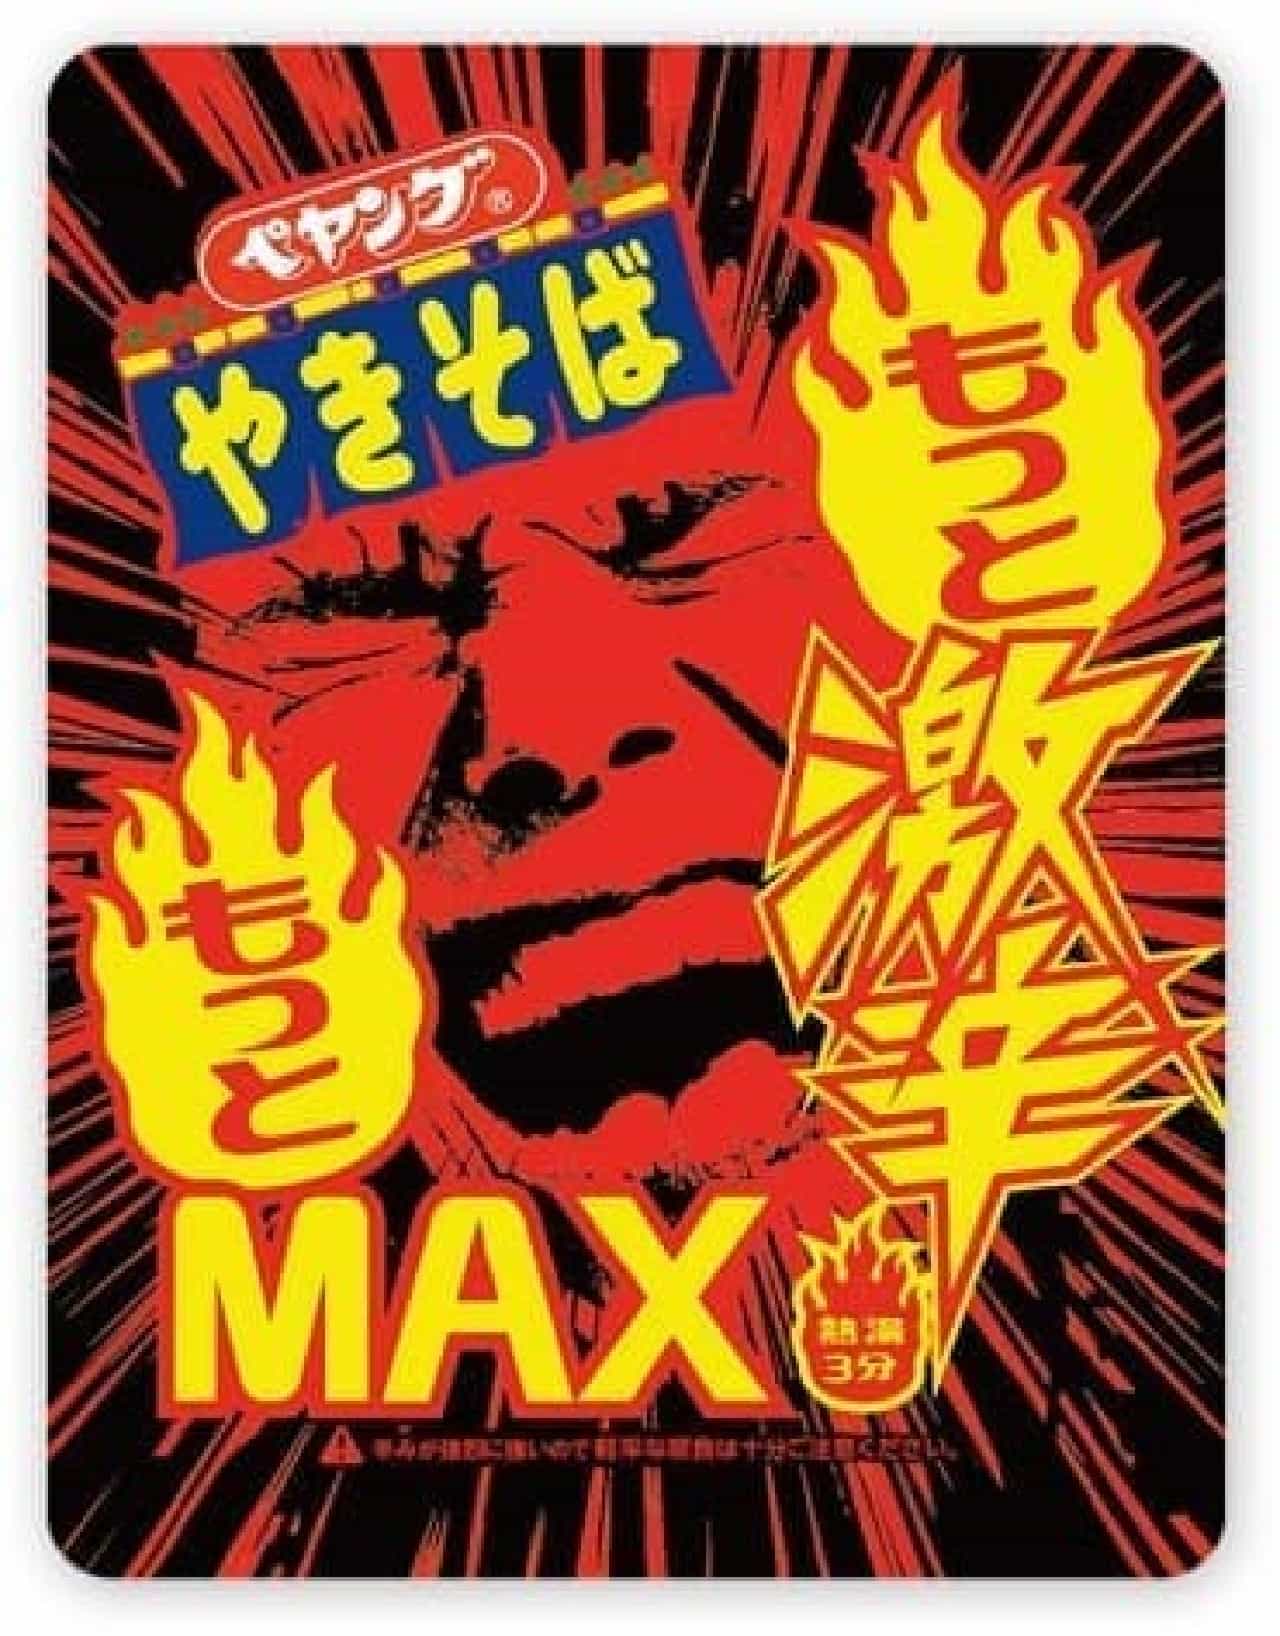 Maruka Foods "Peyoung Much More Spicy MAX Yakisoba"